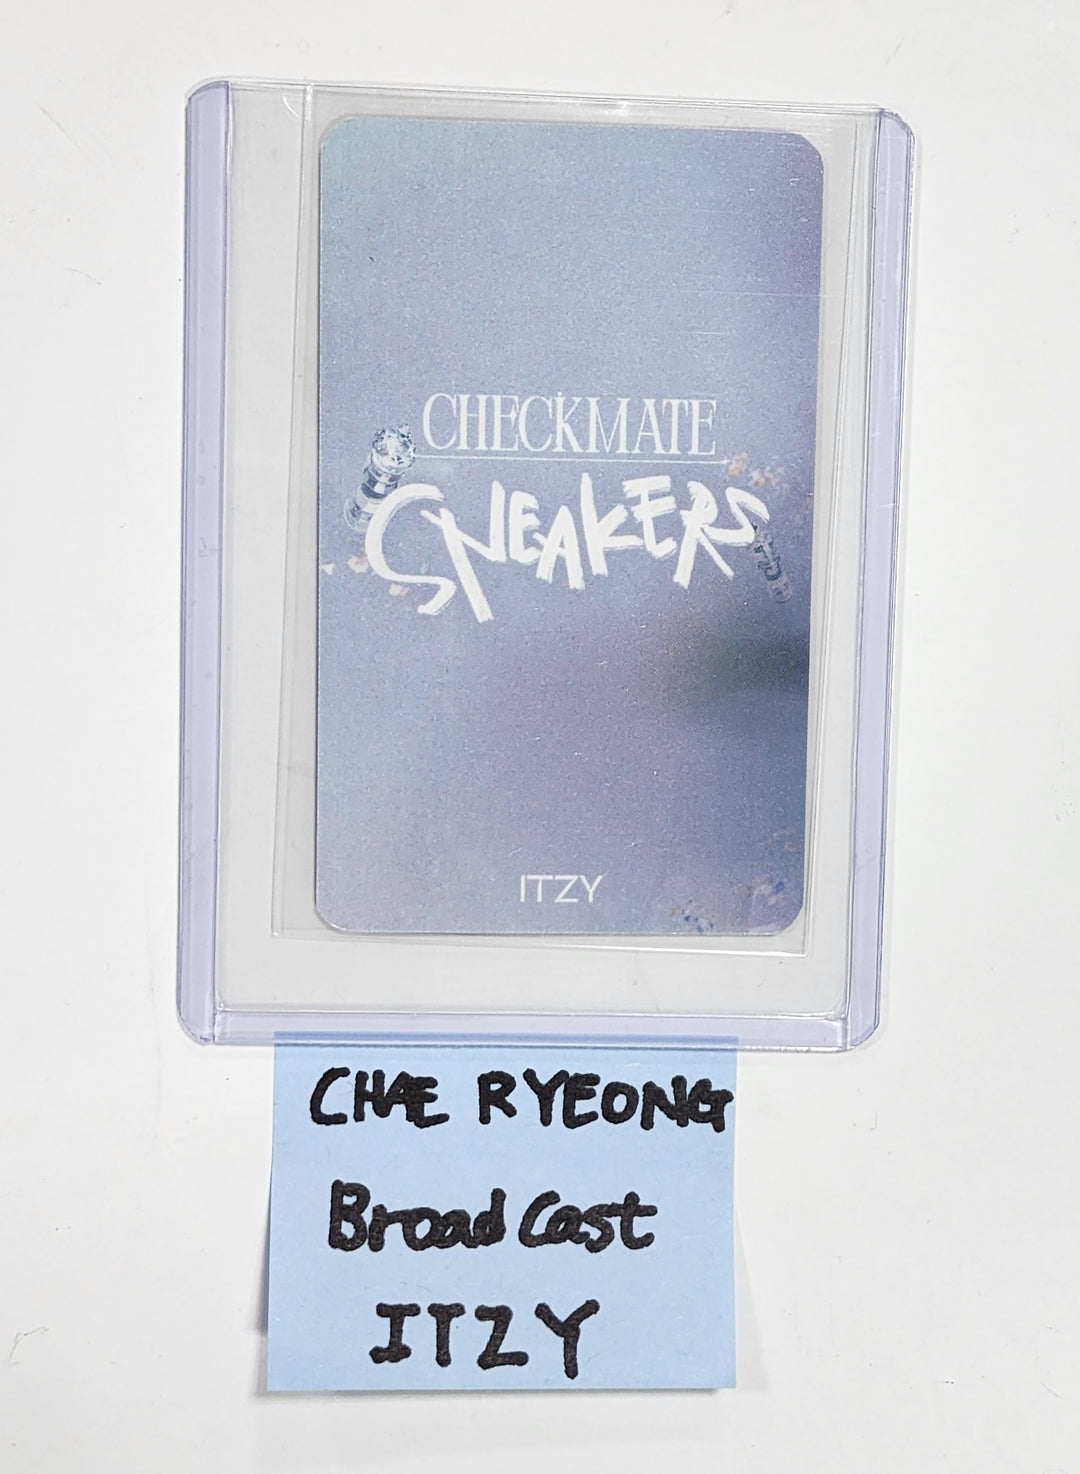 Chae Ryeong (Of ITZY) ‘CHECKMATE’ - Broadcast Photocard